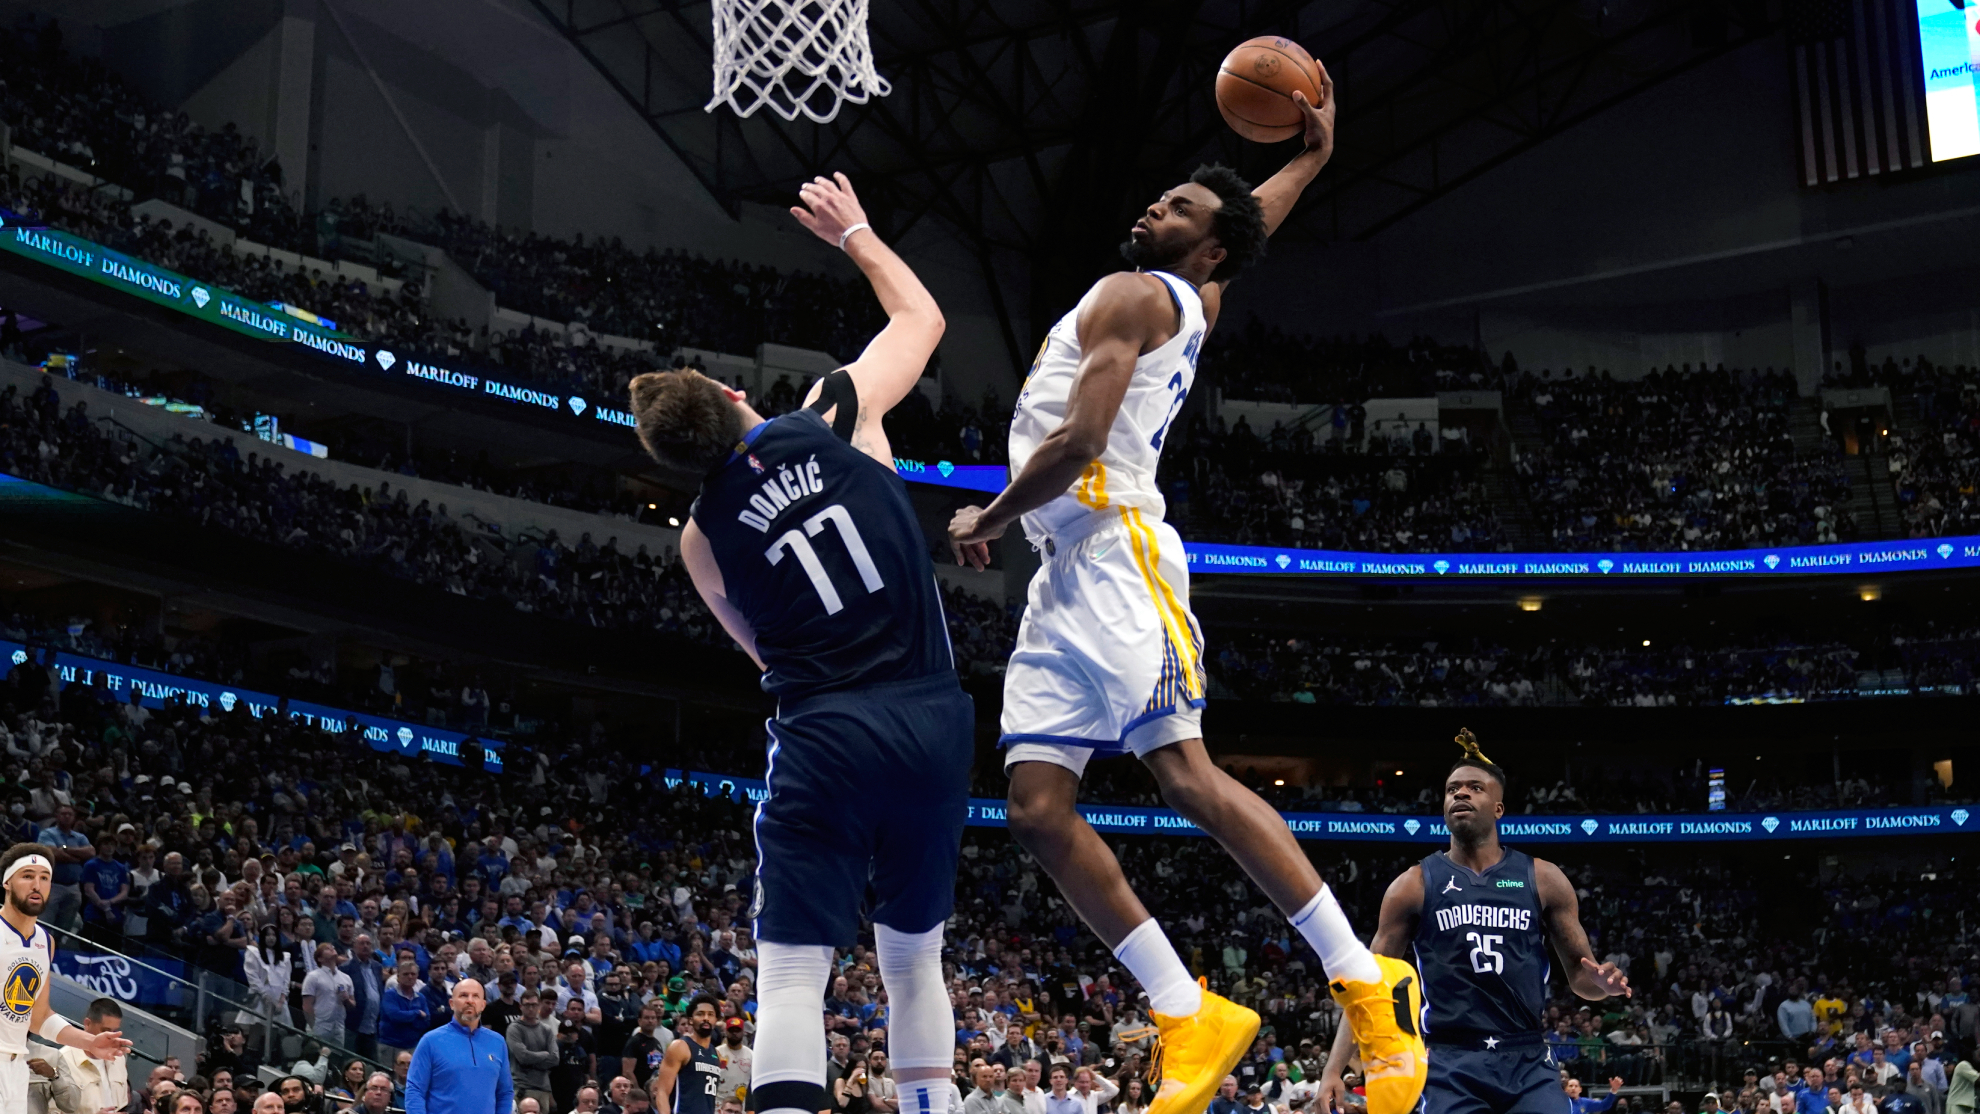 Golden State Warriors forward Andrew Wiggins (22) dunks the ball over Dallas Mavericks guard Luka Doncic (77) during the second half of Game 3 of the NBA basketball playoffs Western Conference Finals.